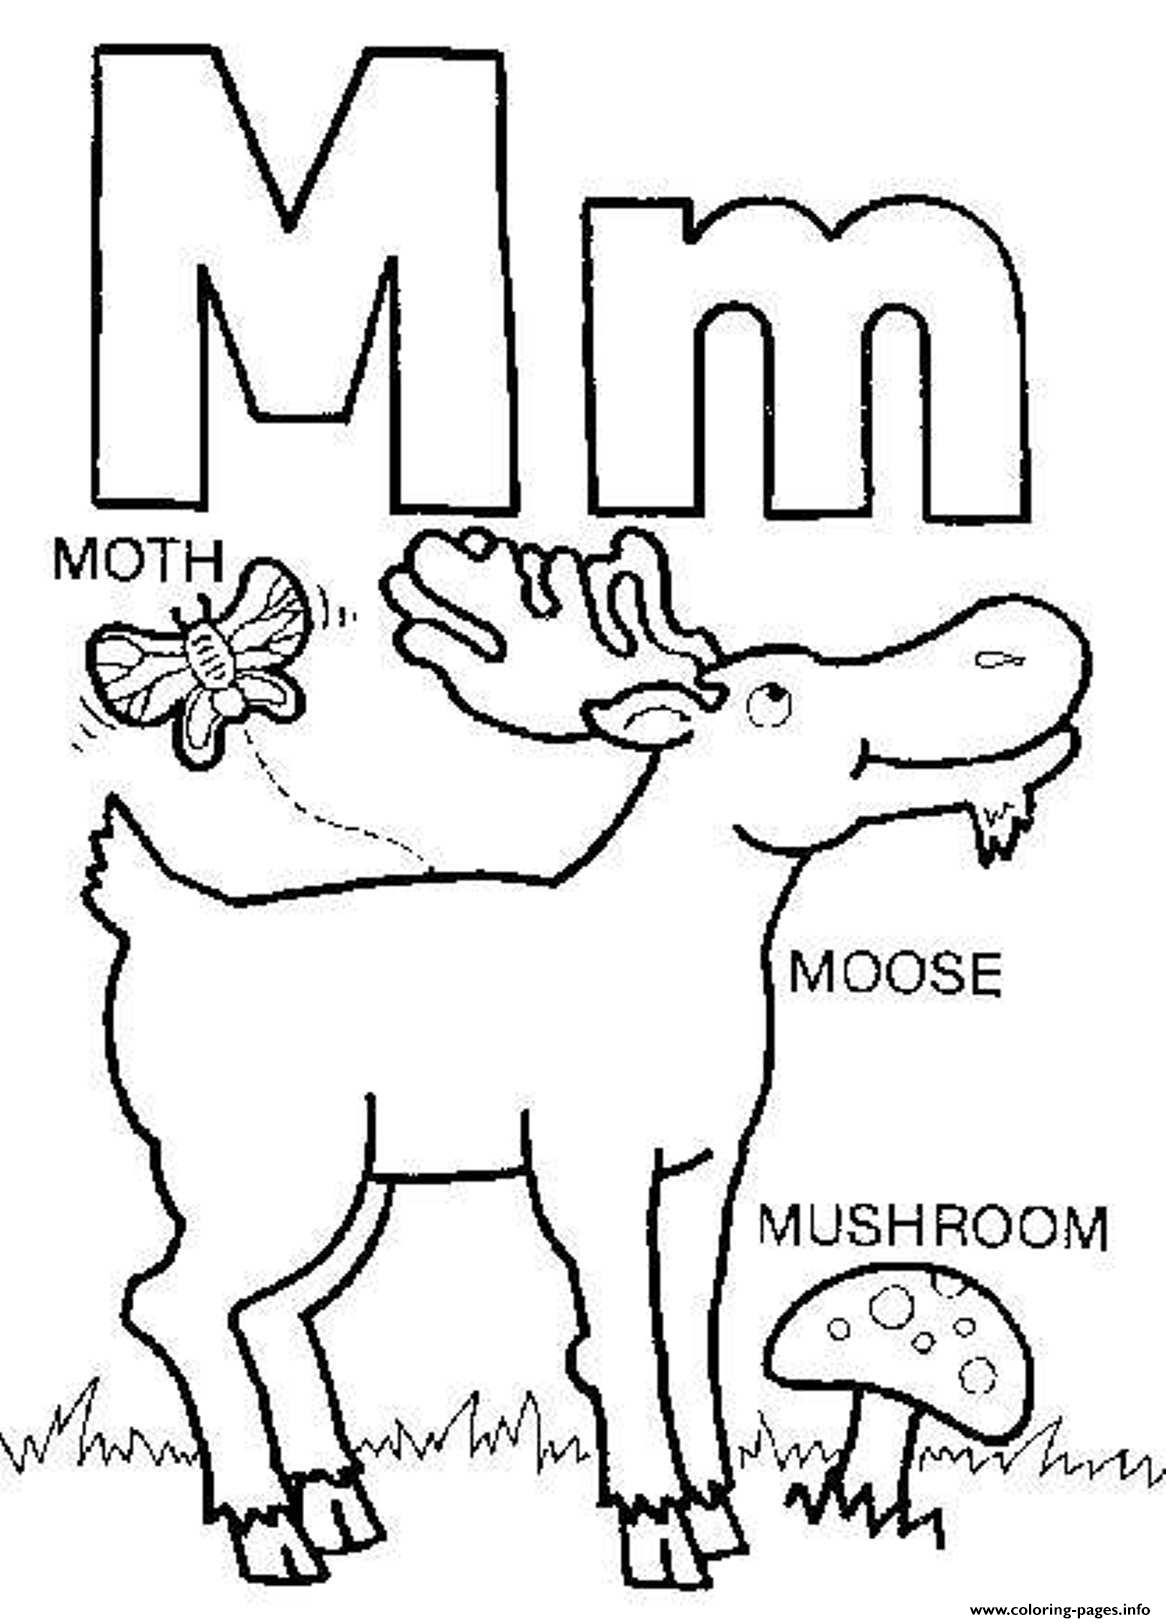 Download M Words Free Alphabet S70ac Coloring Pages Printable